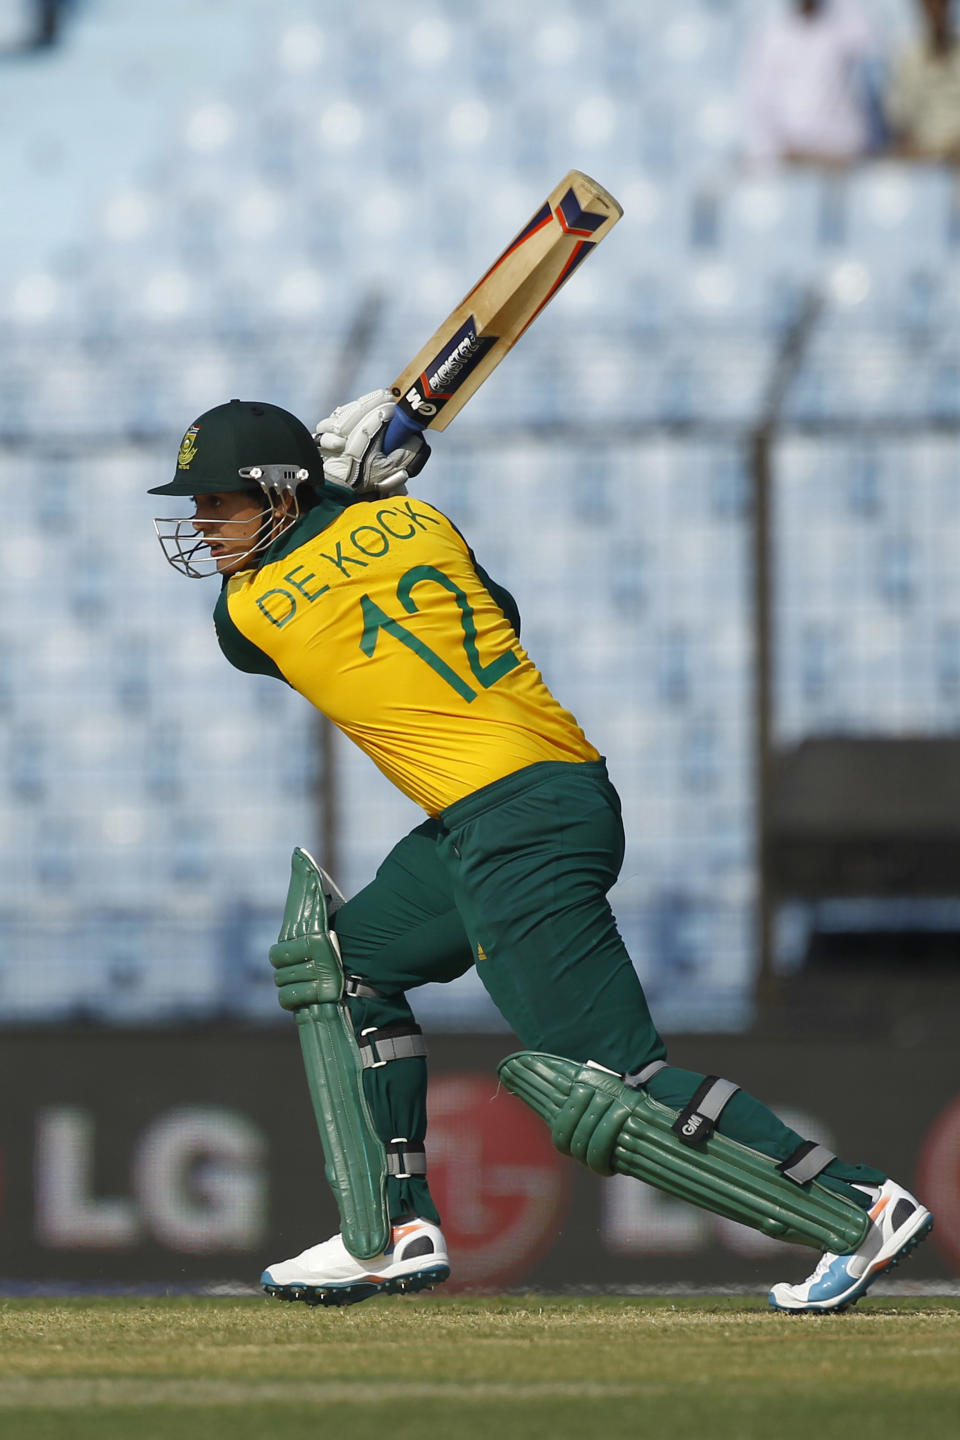 South Africa's Quinton de Kock plays a shot during their ICC Twenty20 Cricket World Cup match against New Zealand in Chittagong, Bangladesh, Monday, March 24, 2014. (AP Photo/A.M. Ahad)